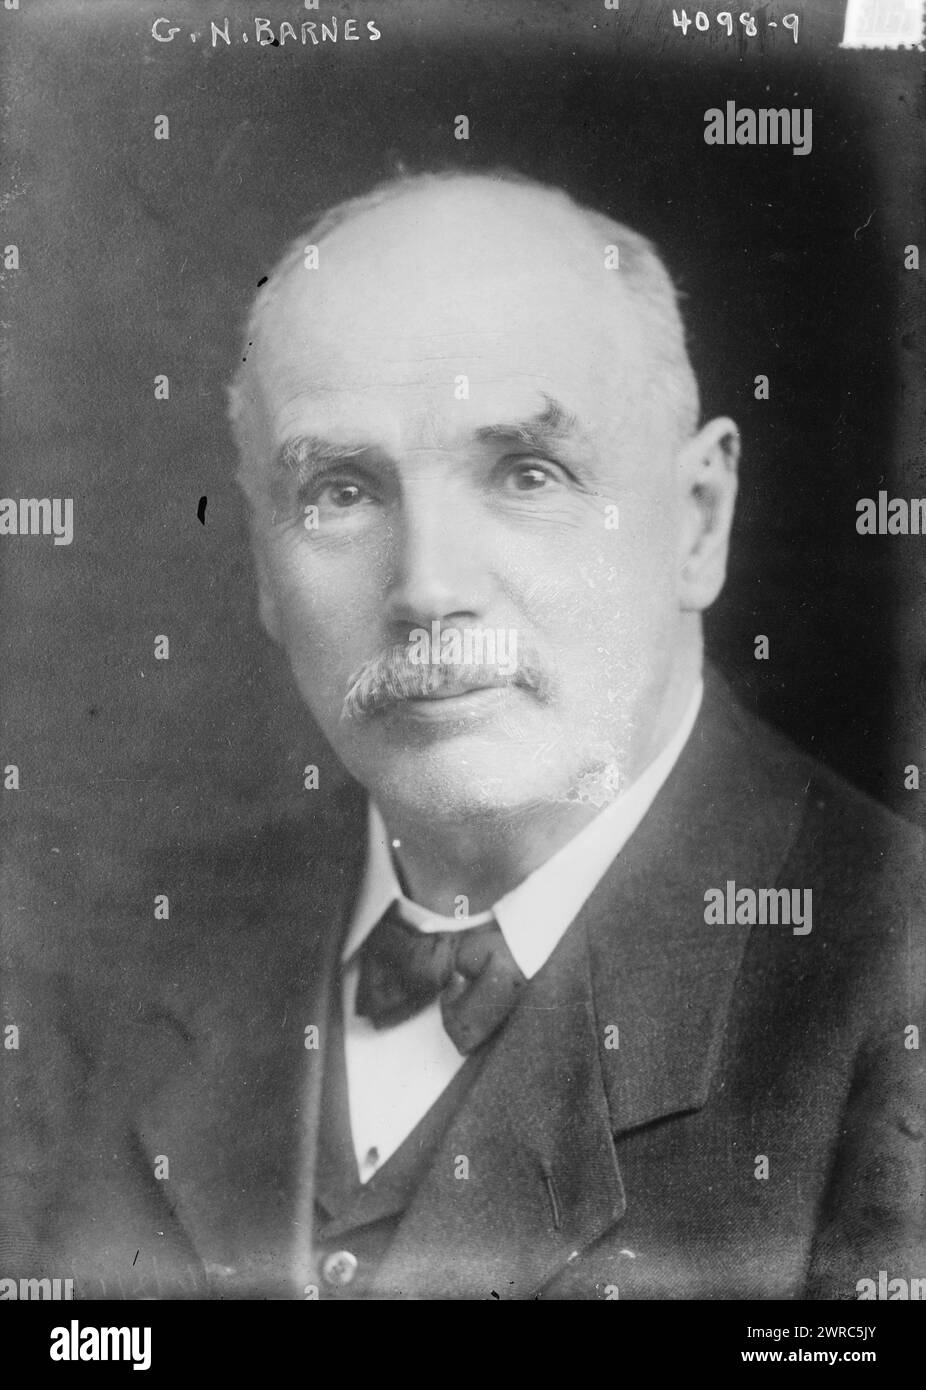 G.N. Barnes, Photograph shows Scottish Labour Party politician George Nicoll Barnes (1859-1940), who served as Minister of Pensions (1916-1917)., 1917, Glass negatives, 1 negative: glass Stock Photo